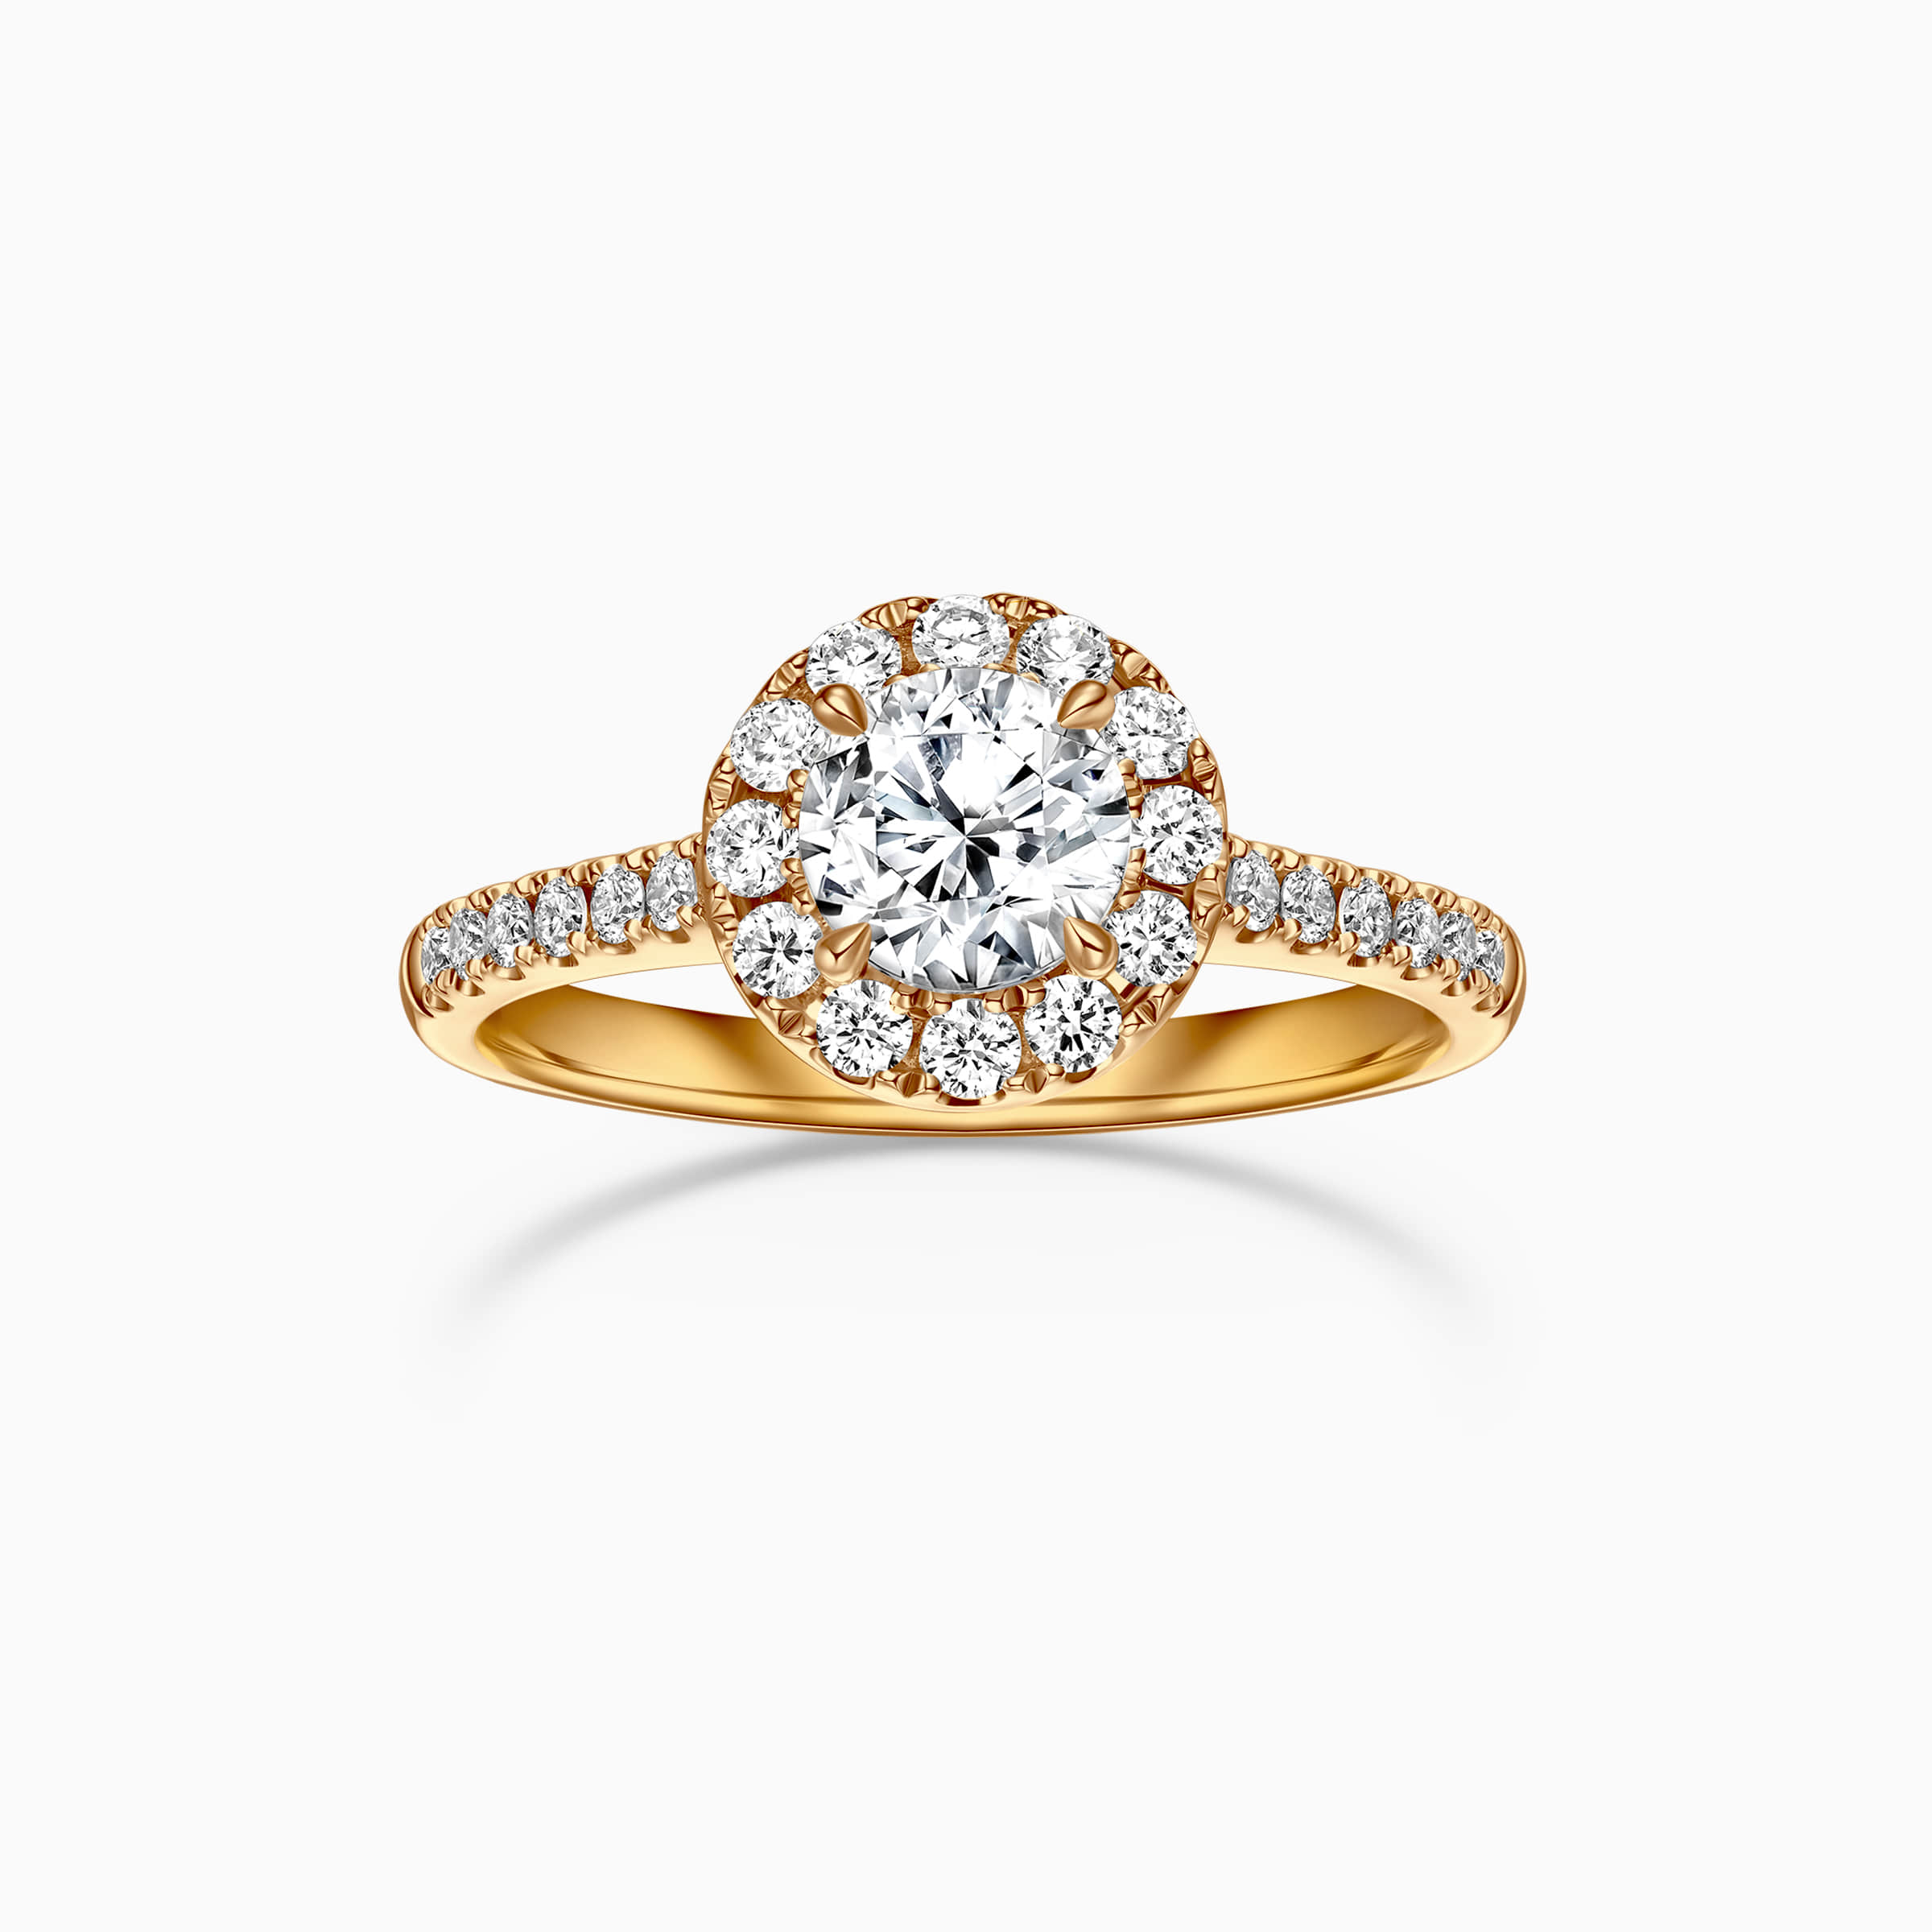 Darry Ring round halo promise ring yellow gold